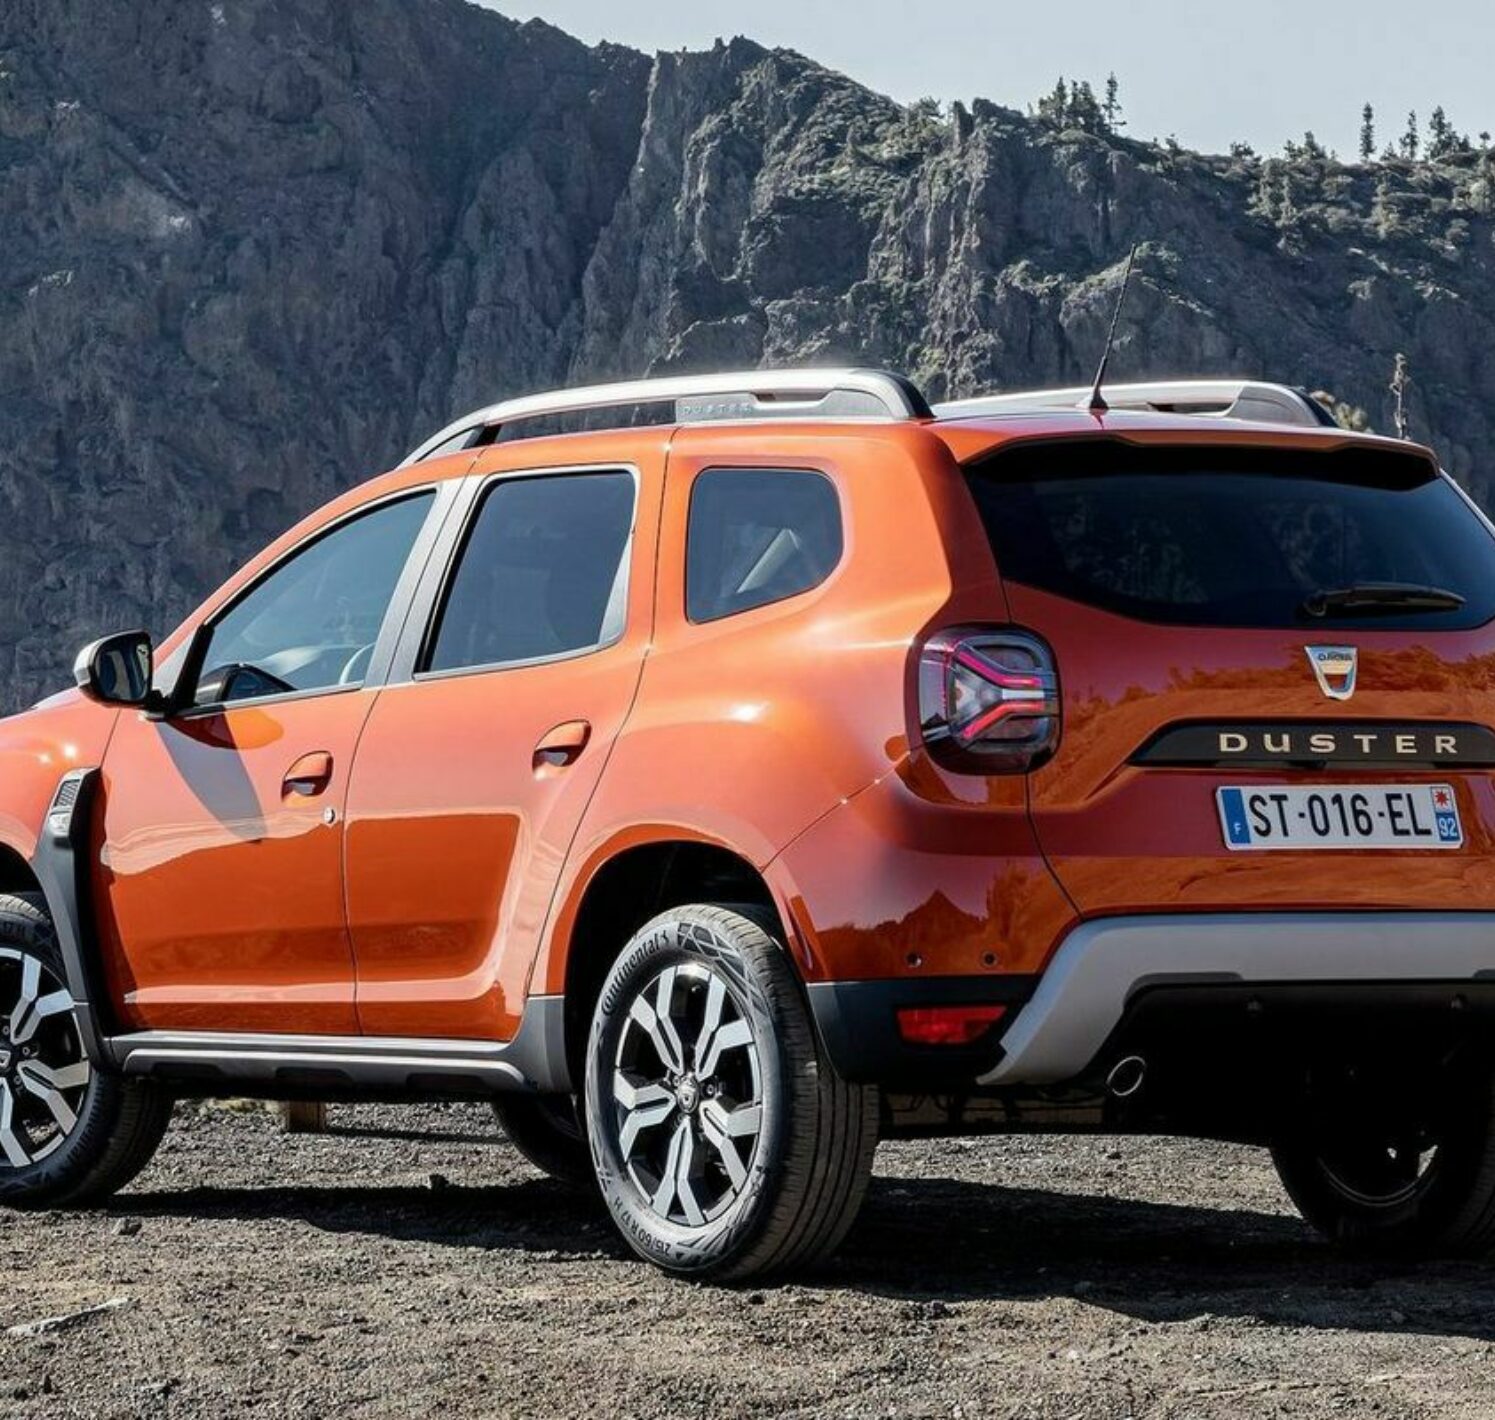 https://autofilter.sk/assets/images/duster/gallery/dacia-duster-2021_32-galeria.jpeg - obrazok